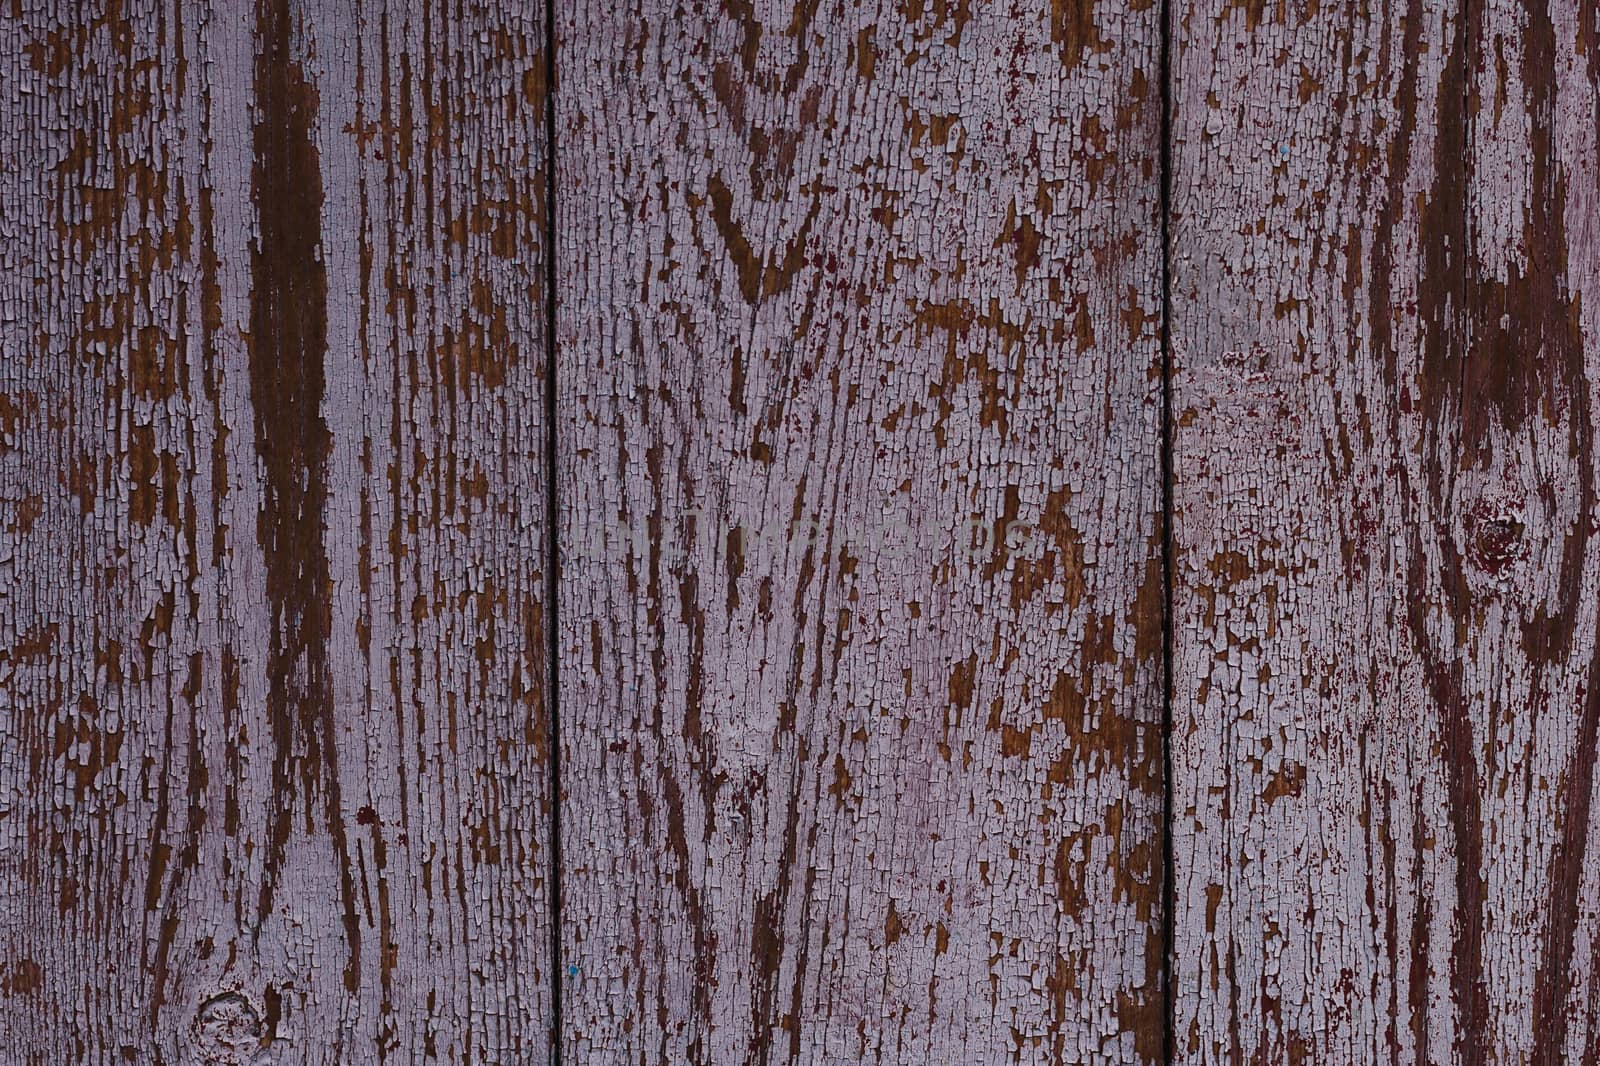 Old red wooden texured door surface closeup. Relief on surface. Stock photo of old wooden door pattern of aged boards with scratches. Red and gray colors on photo.